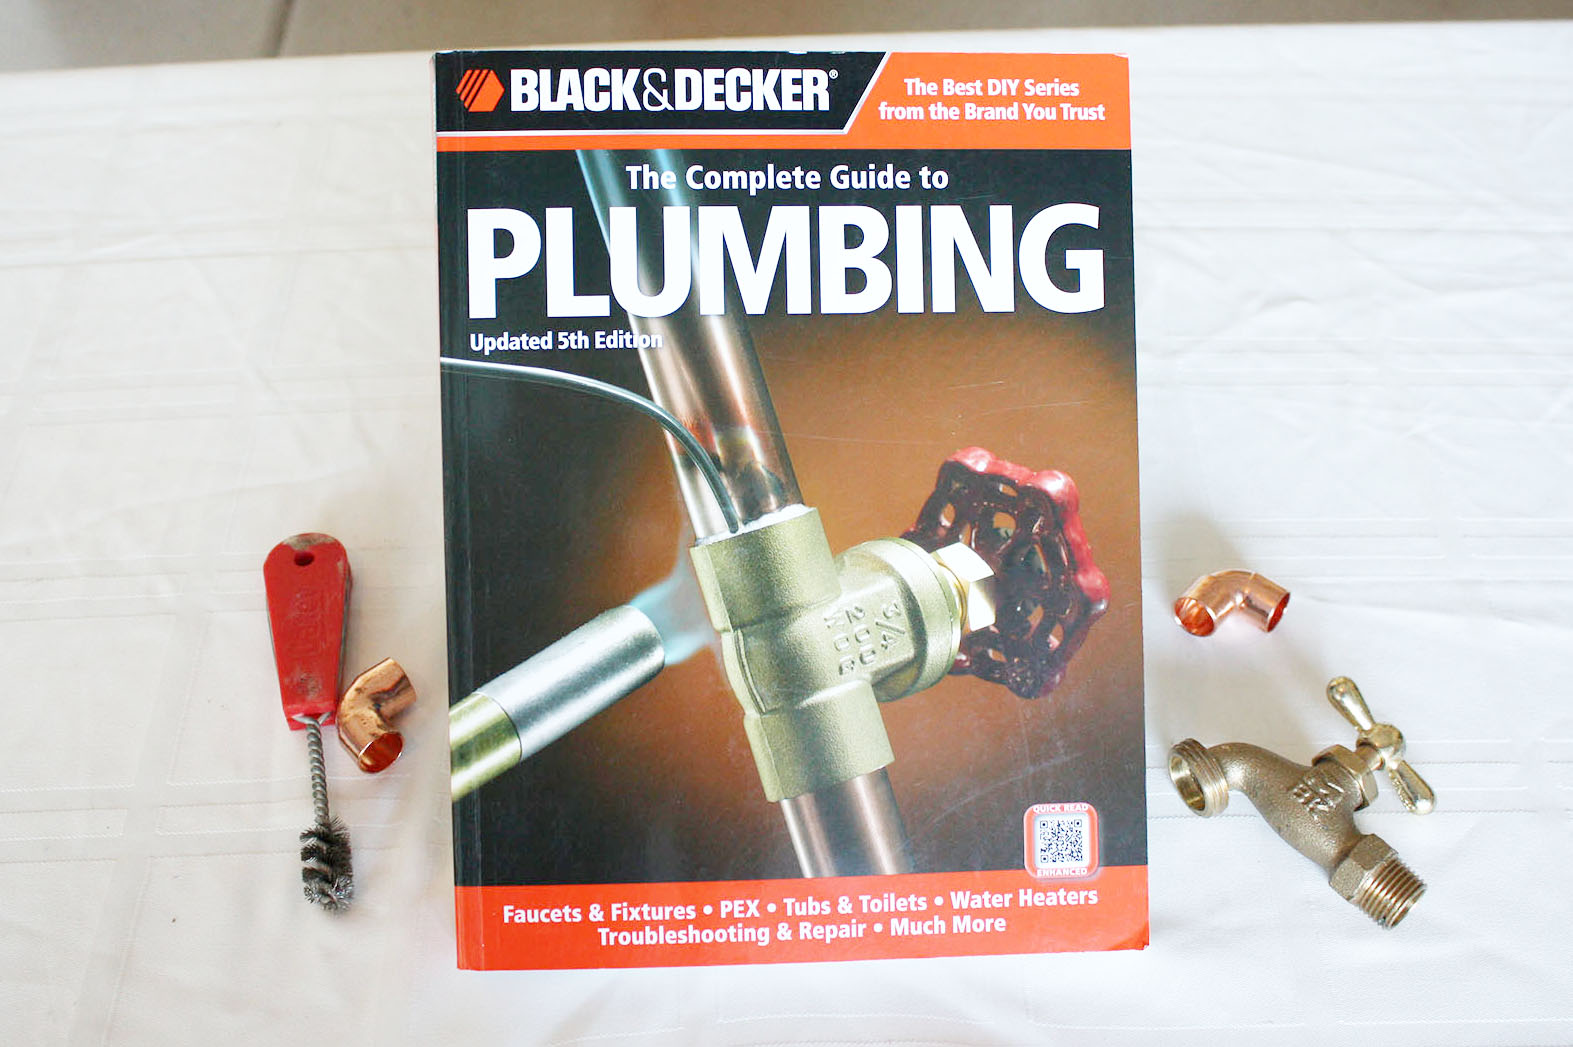 https://www.theconstructionacademy.com/wp-content/uploads/2014/03/The-Complete-Guide-to-Plumbing1.jpg